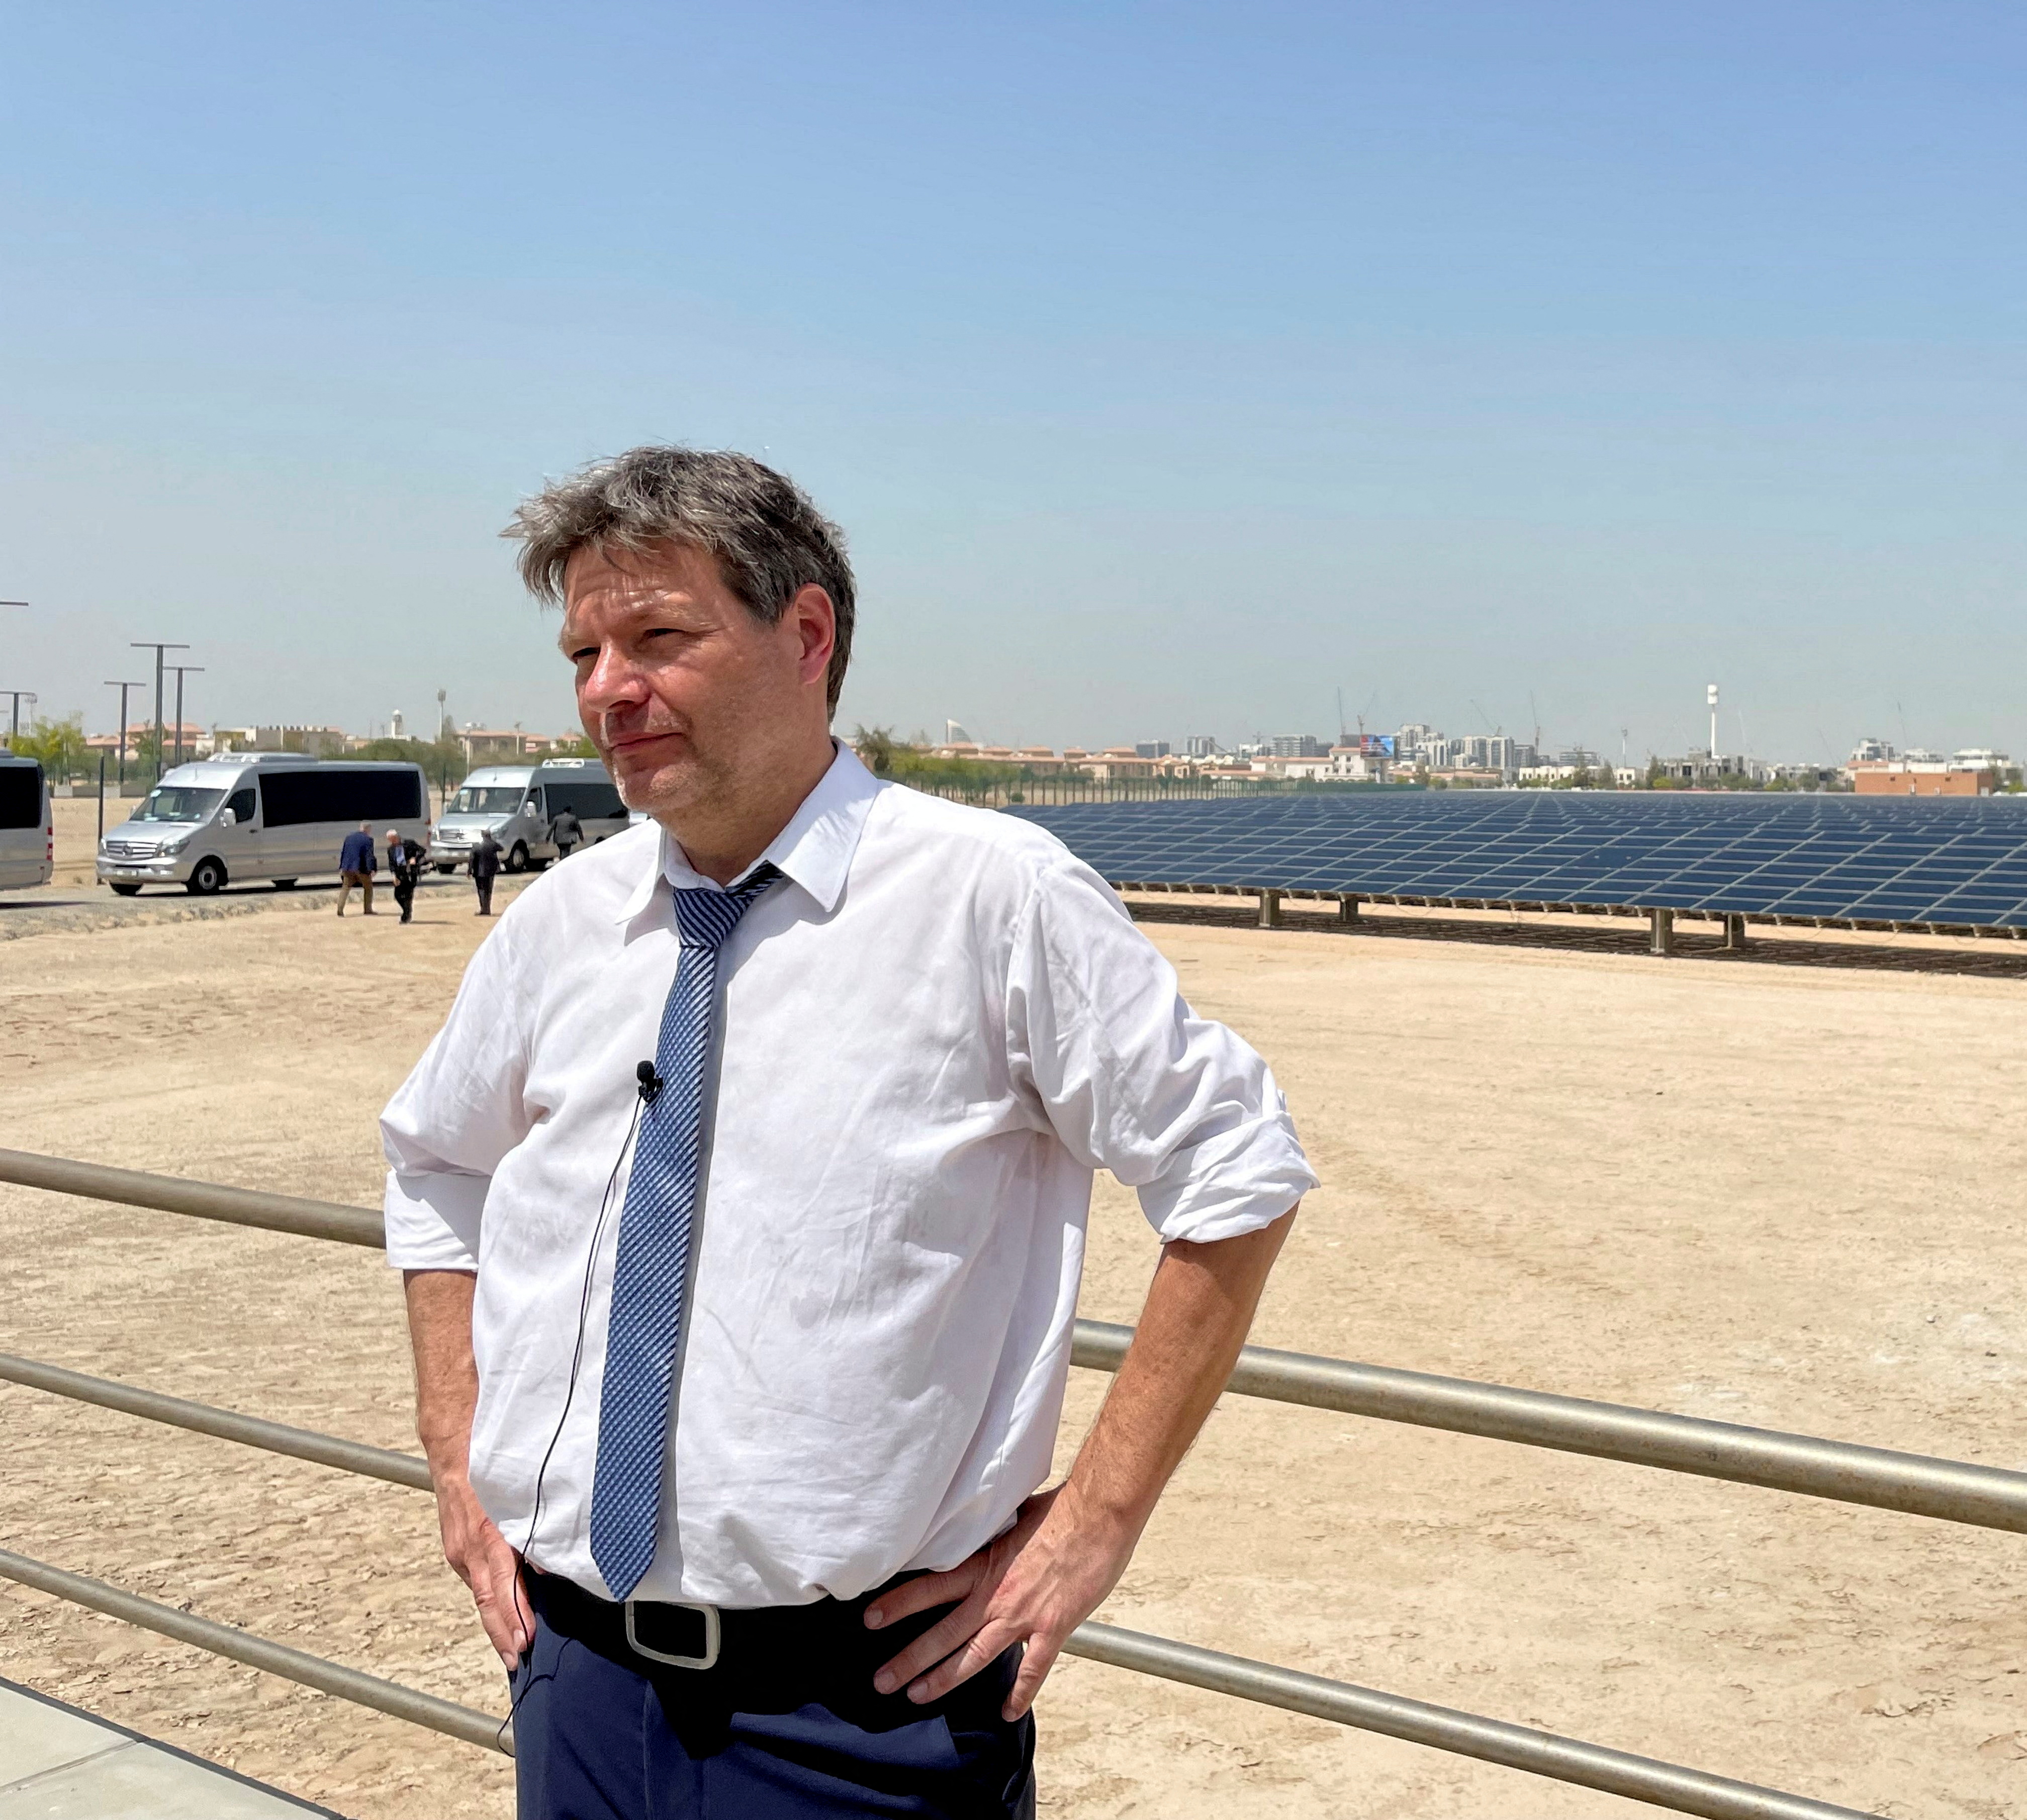 German Economy Minister Habeck gestures after a tour of the solar field at Masdar City, in Abu Dhabi